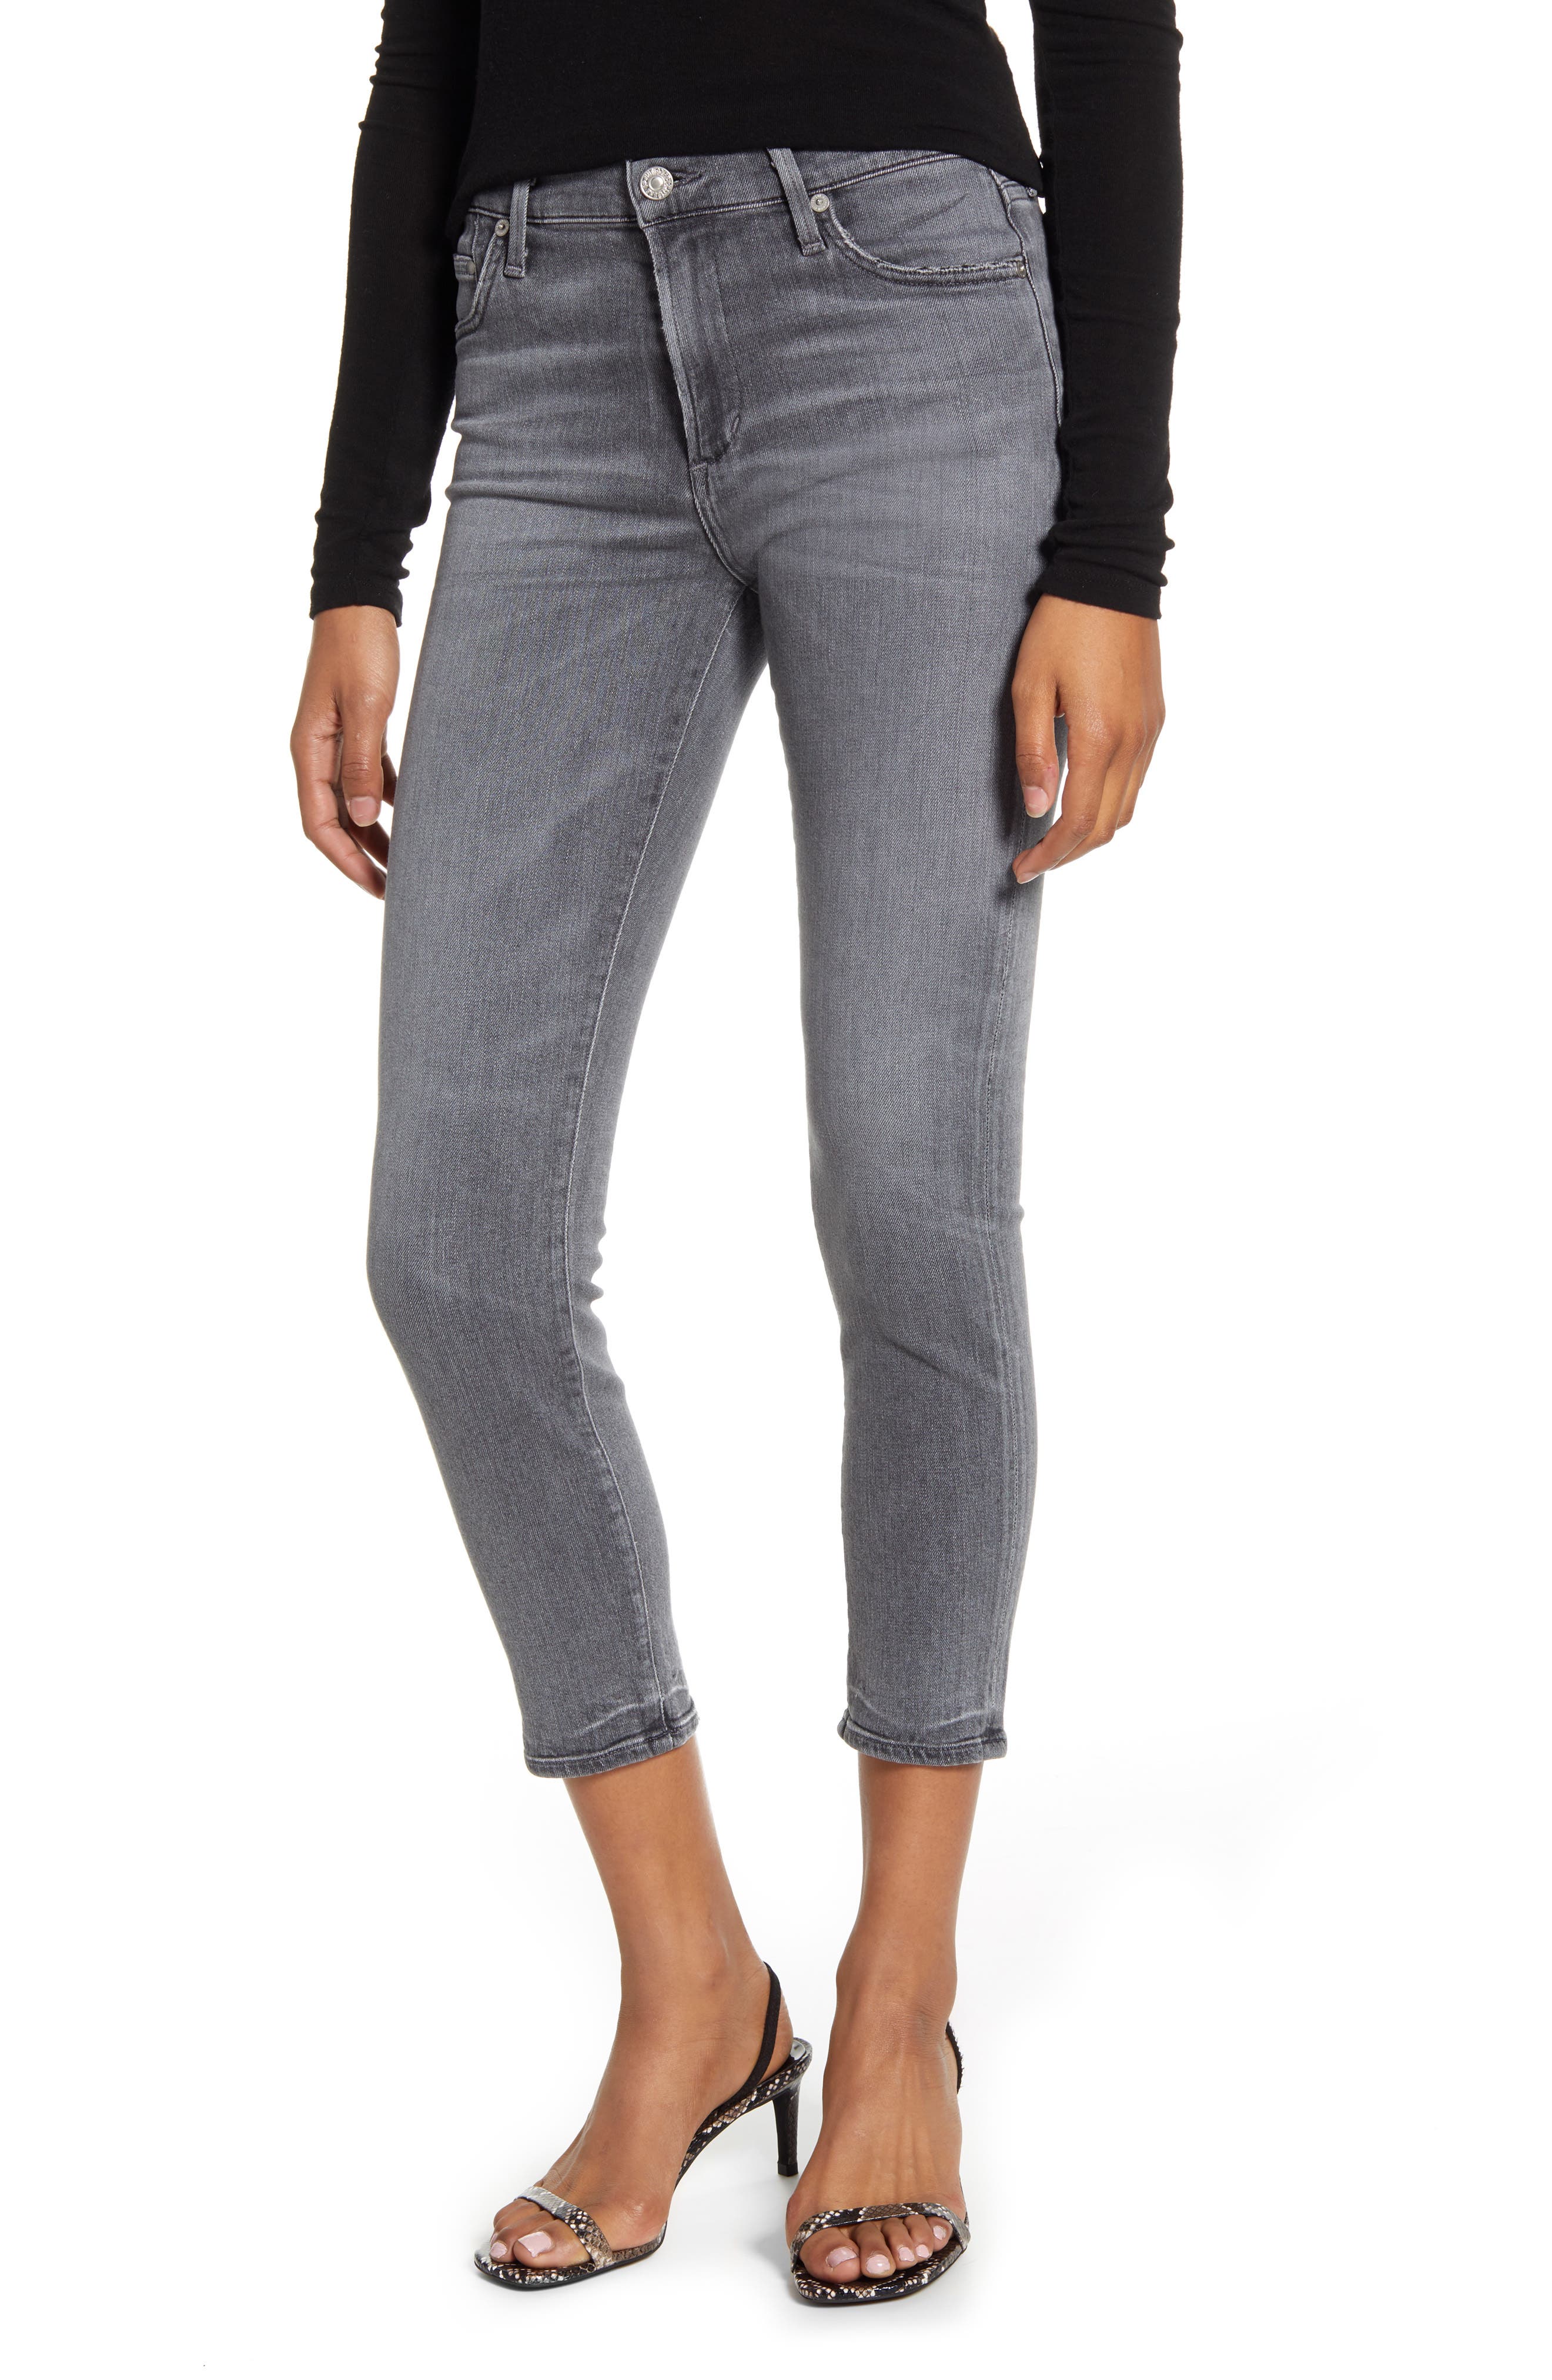 citizens of humanity gray jeans